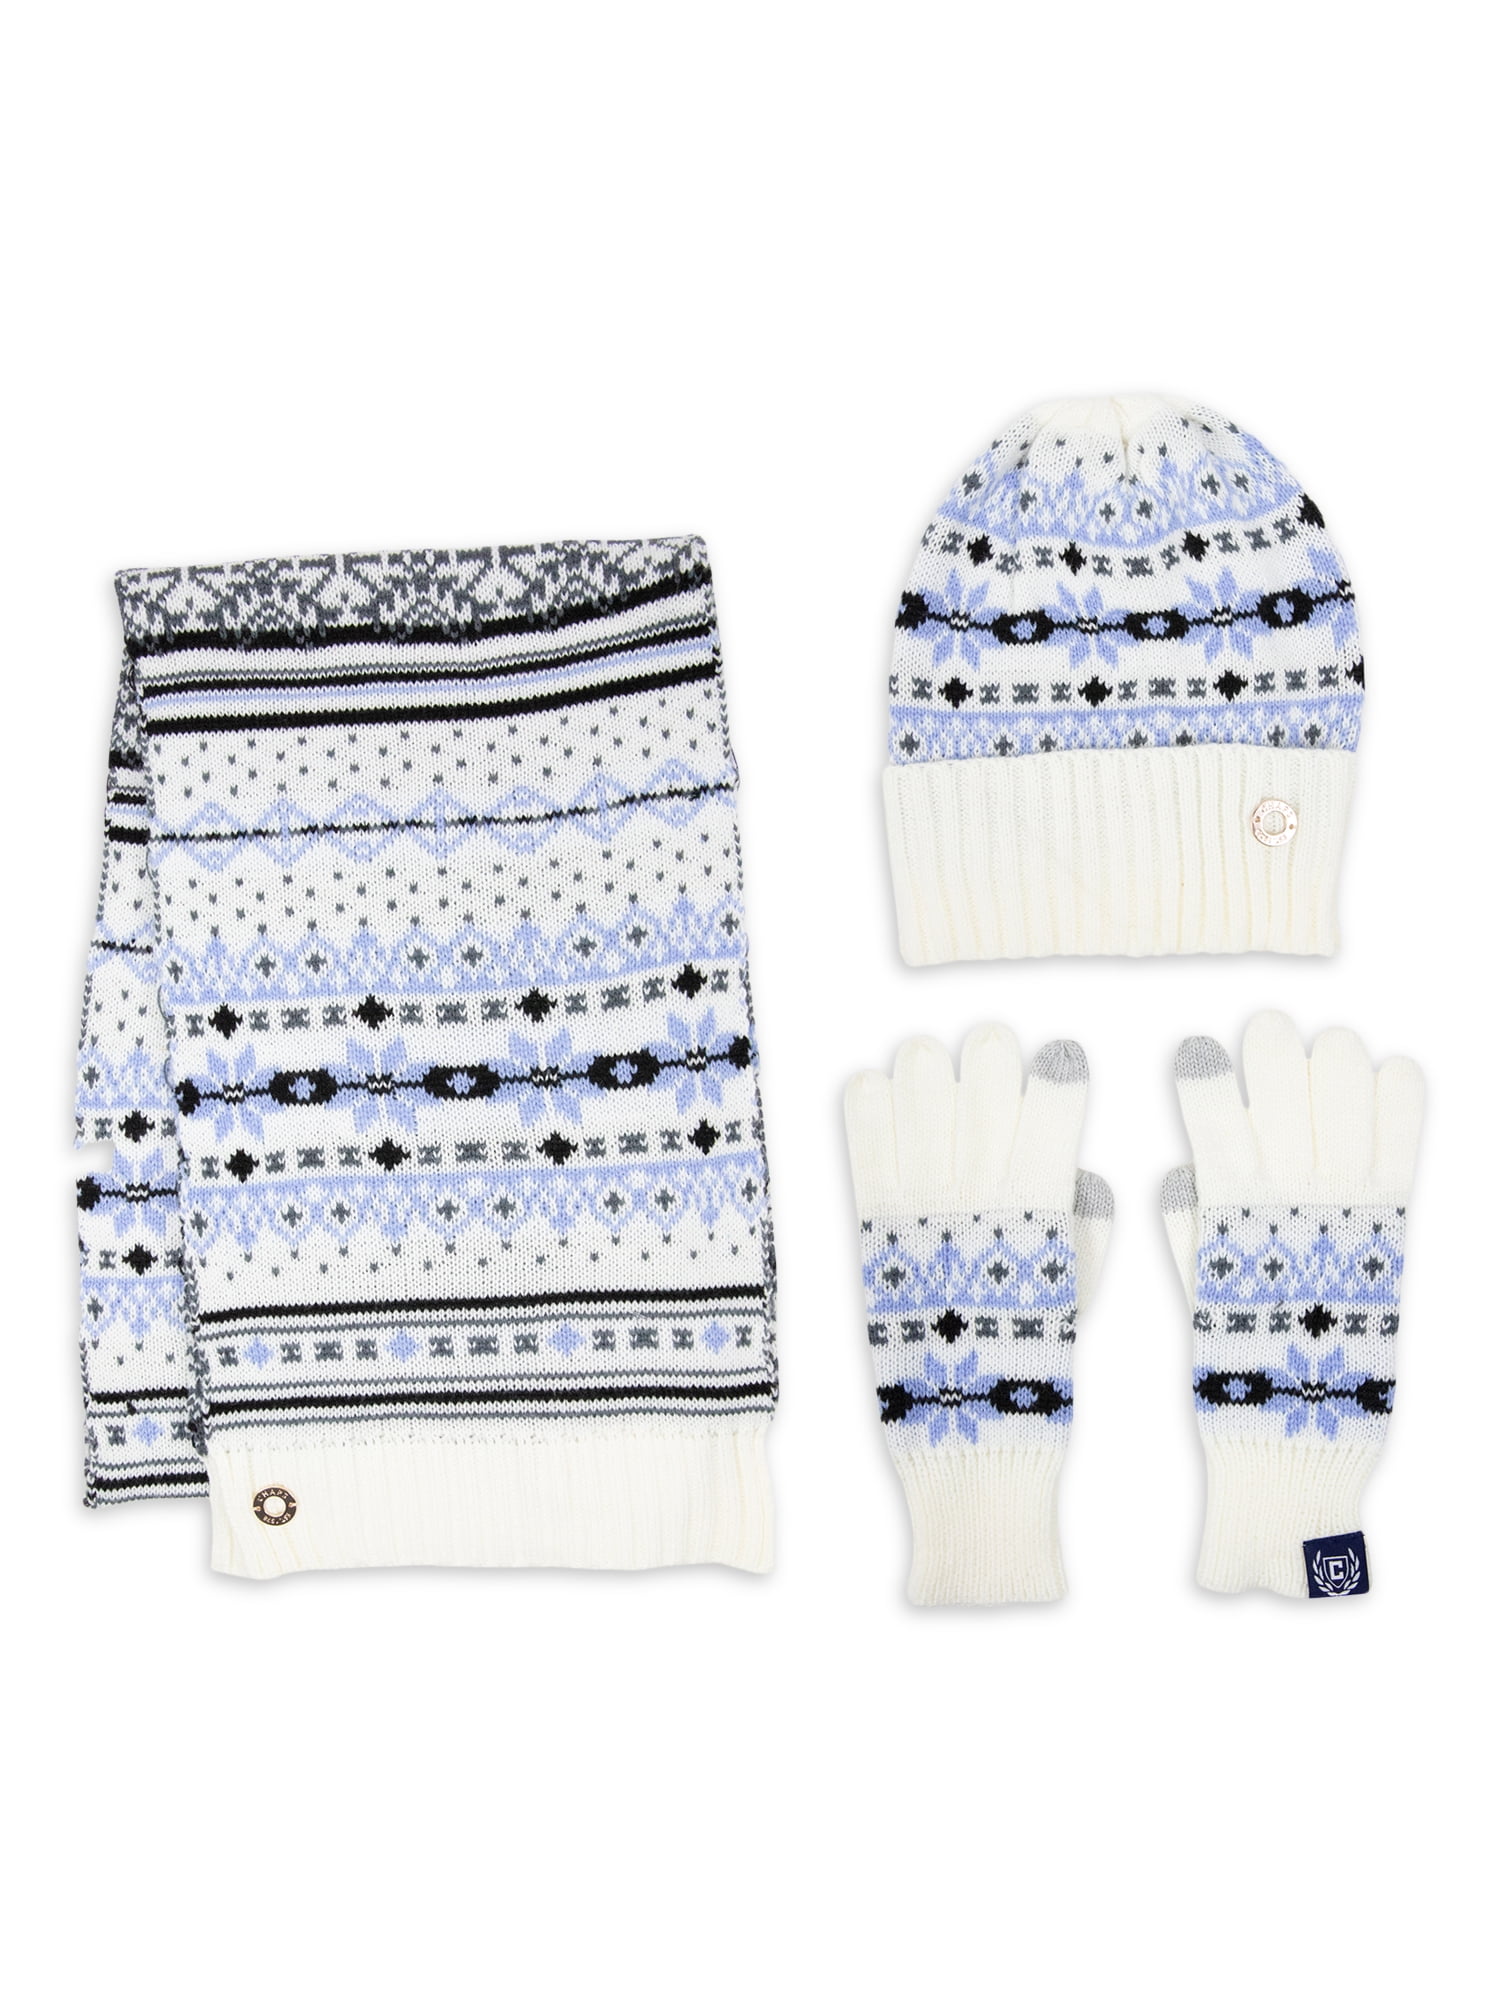 Chaps Brand Women\'s Knit Glove and Fairisle Adult 3 Set, Hat Beanie Piece Style Scarf